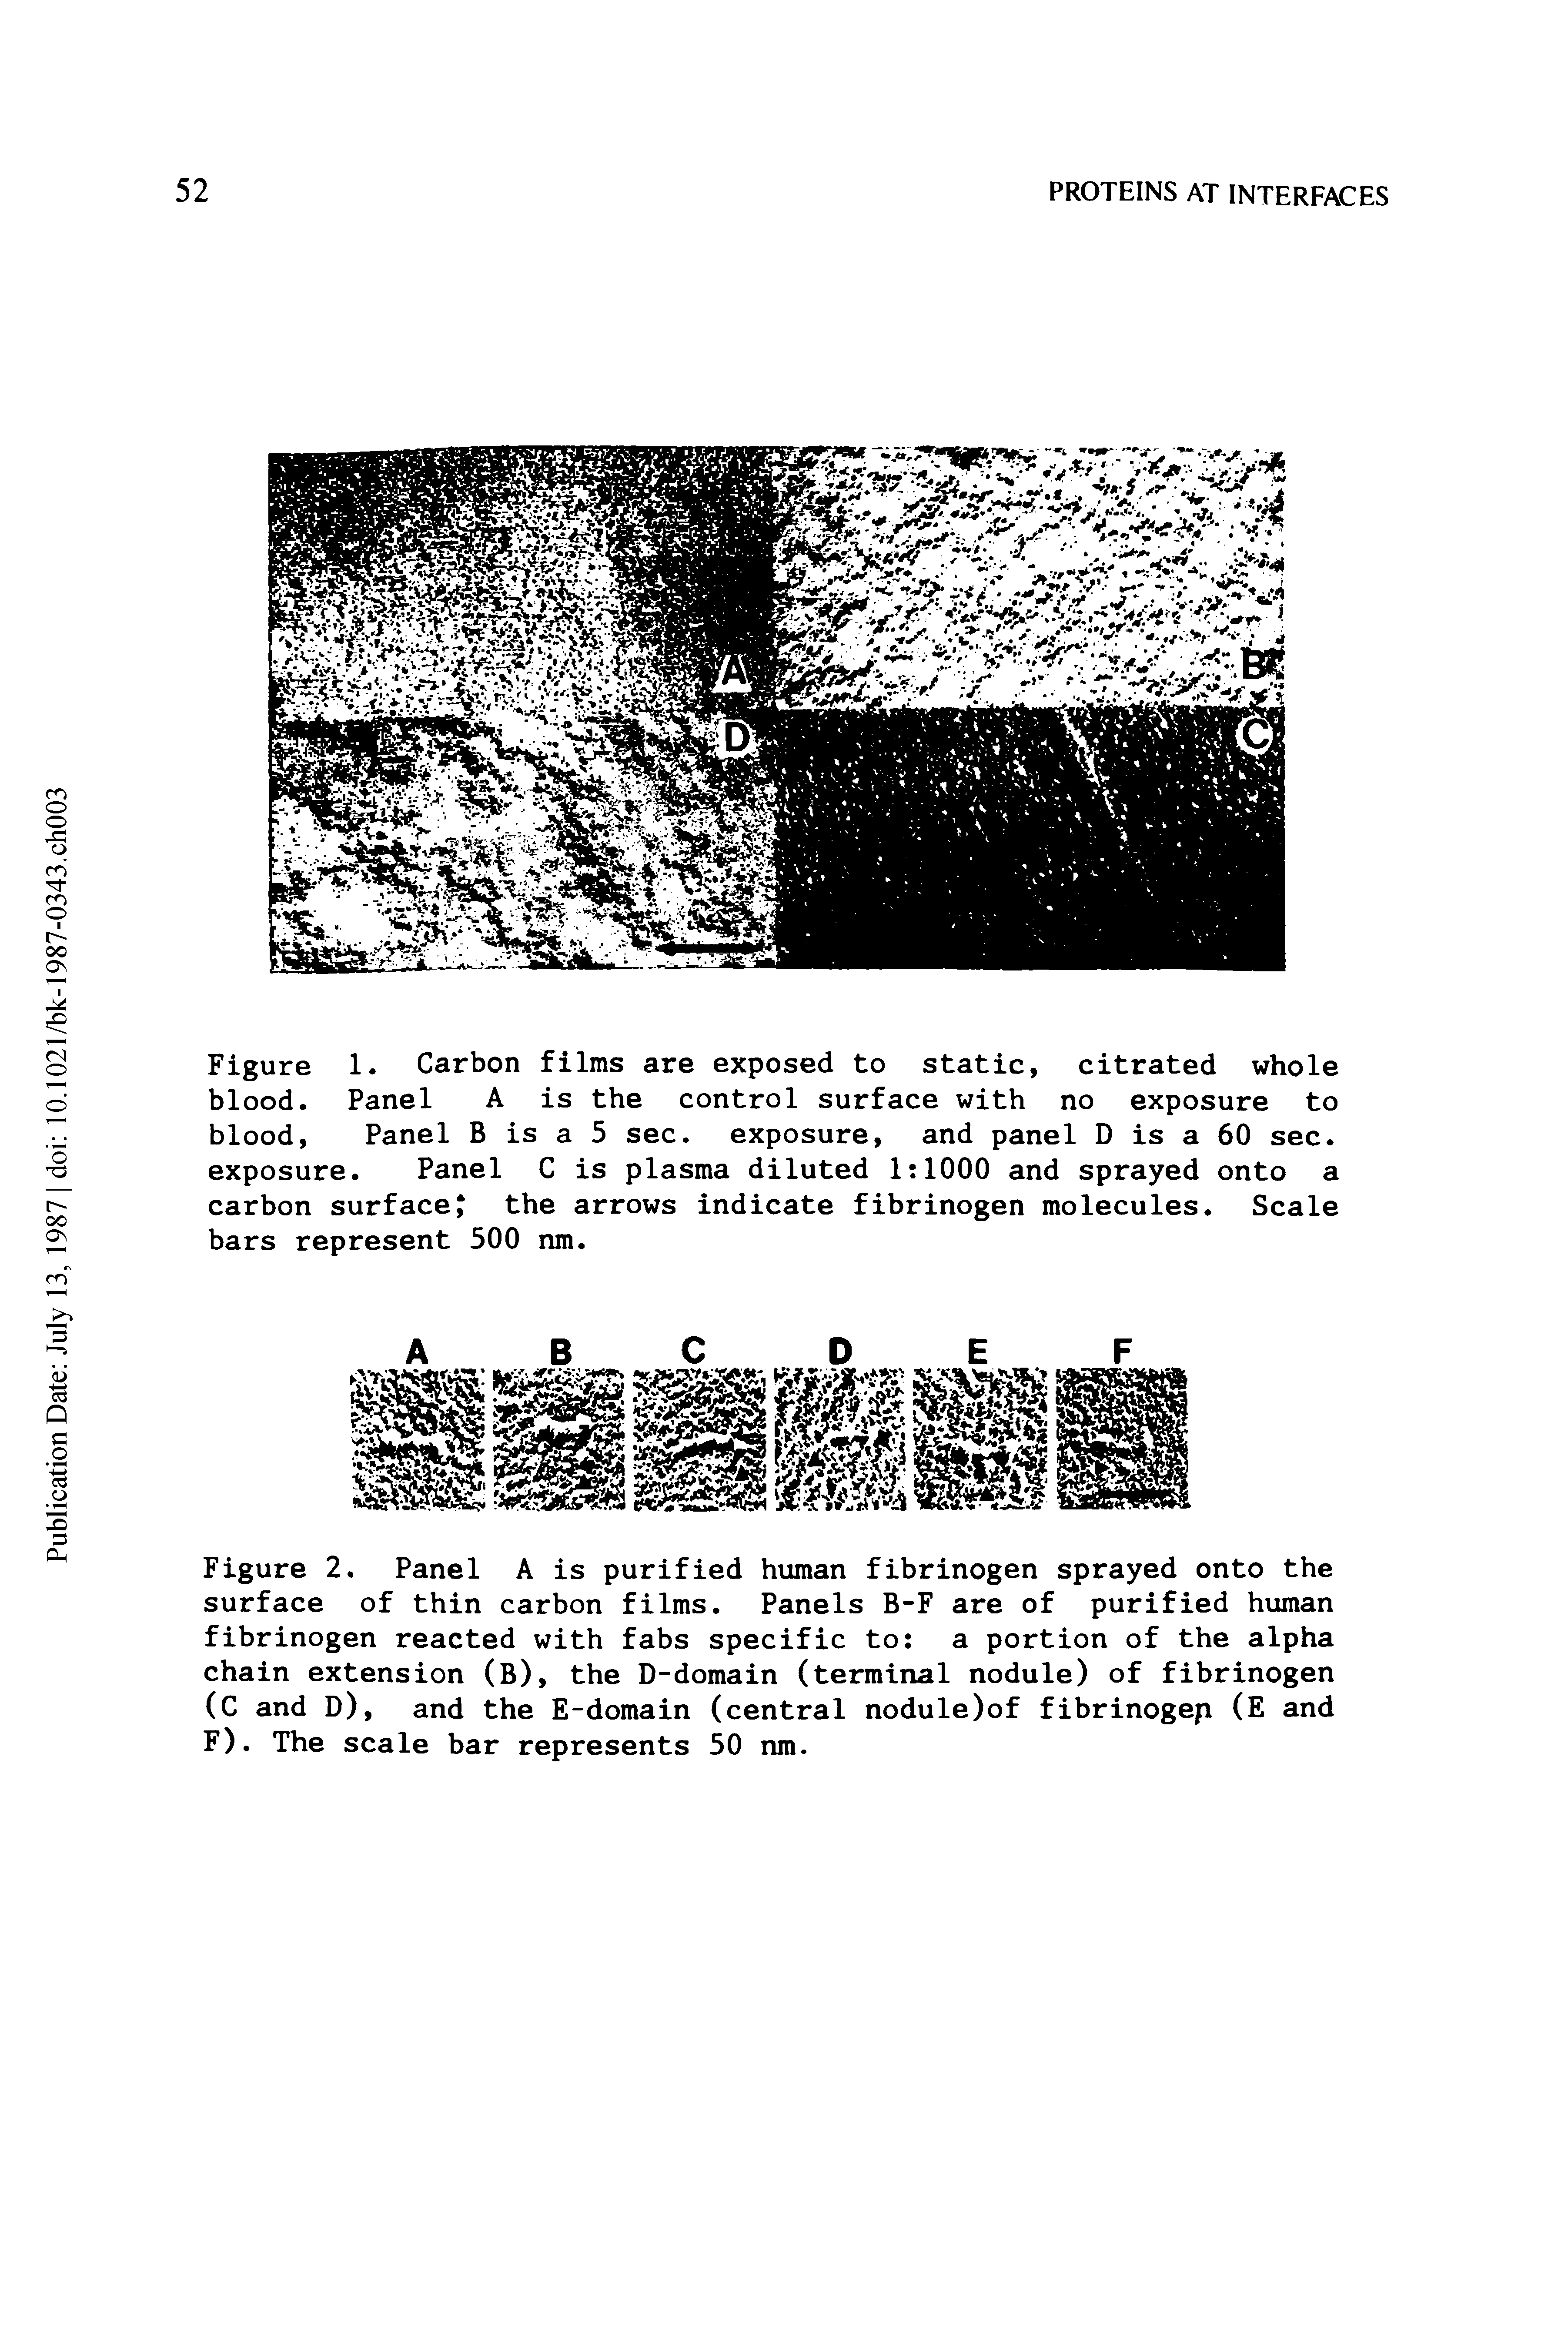 Figure 2. Panel A is purified human fibrinogen sprayed onto the surface of thin carbon films. Panels B-F are of purified human fibrinogen reacted with fabs specific to a portion of the alpha chain extension (B), the D-domain (terminal nodule) of fibrinogen (C and D), and the E-domain (central nodule)of fibrinogep (E and F). The scale bar represents 50 nm.